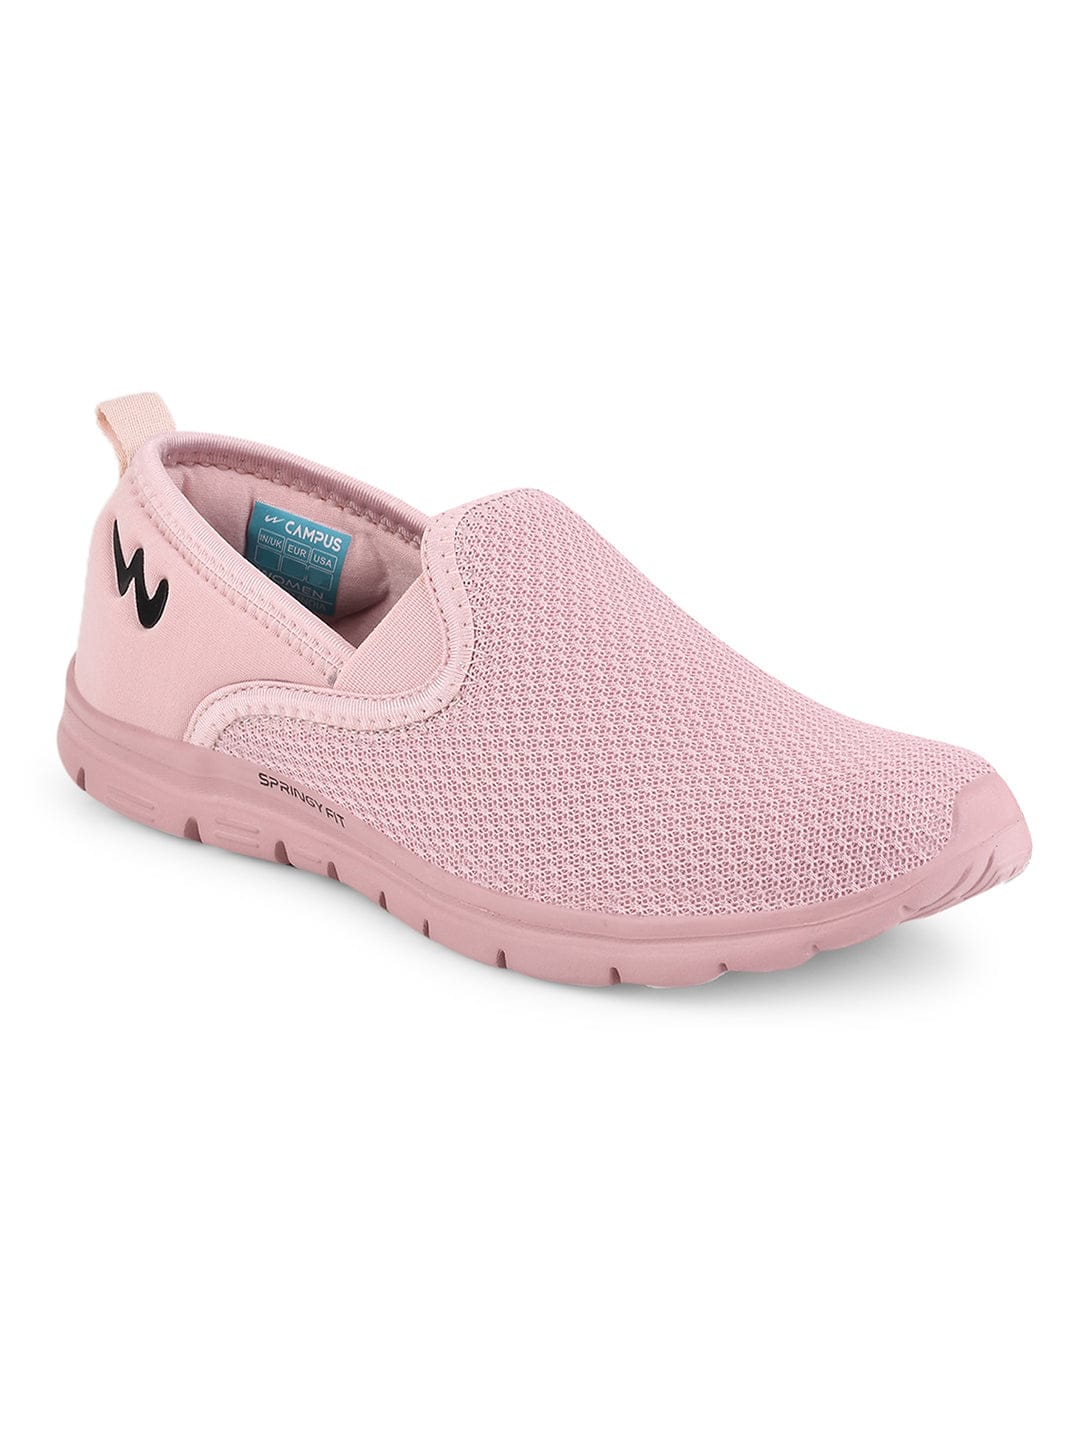 Buy Casual Shoes For Women: Camp-Stanle-Peach | Campus Shoes